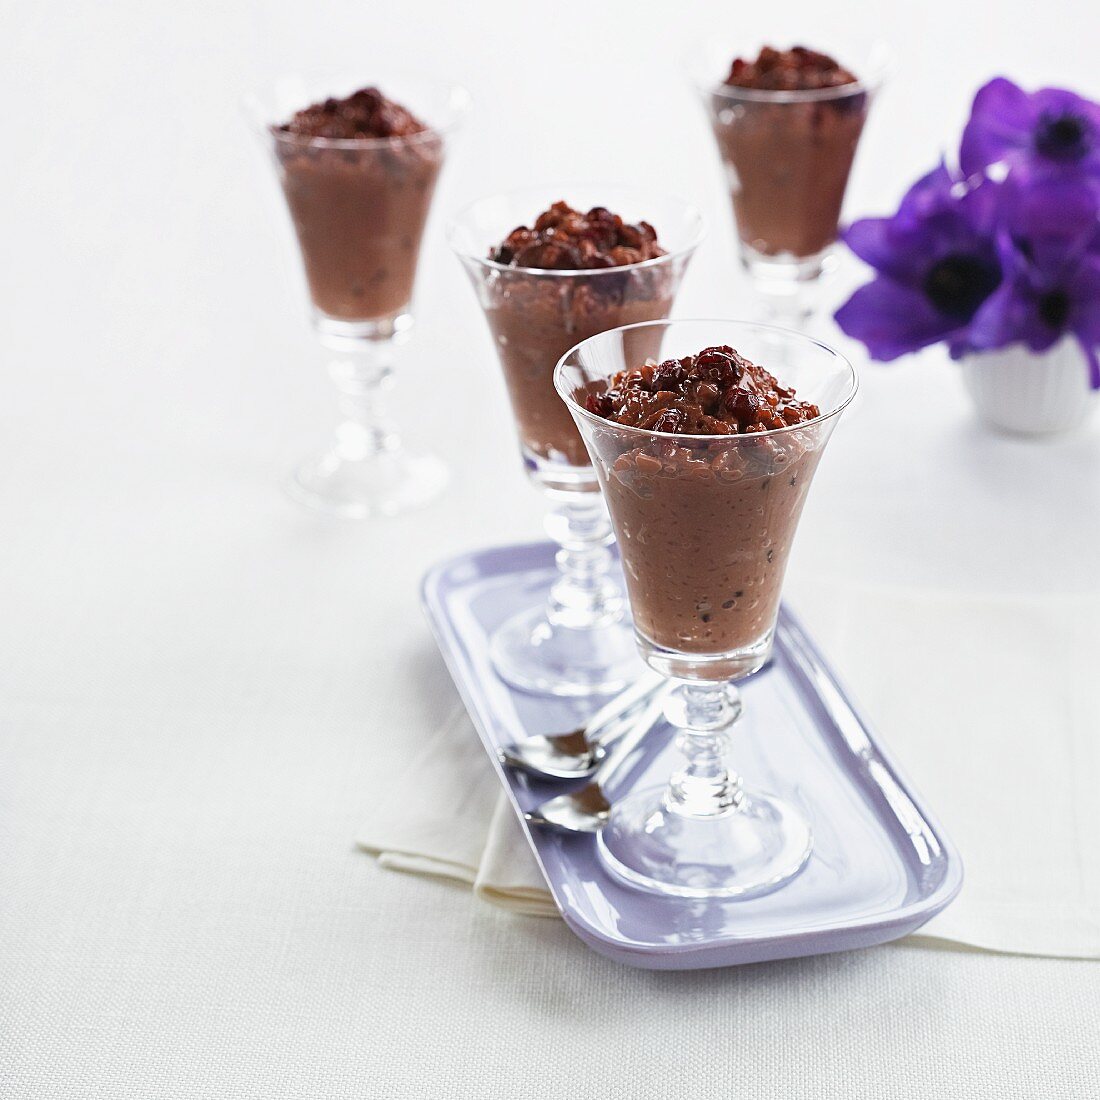 Four glasses of chocolate pudding